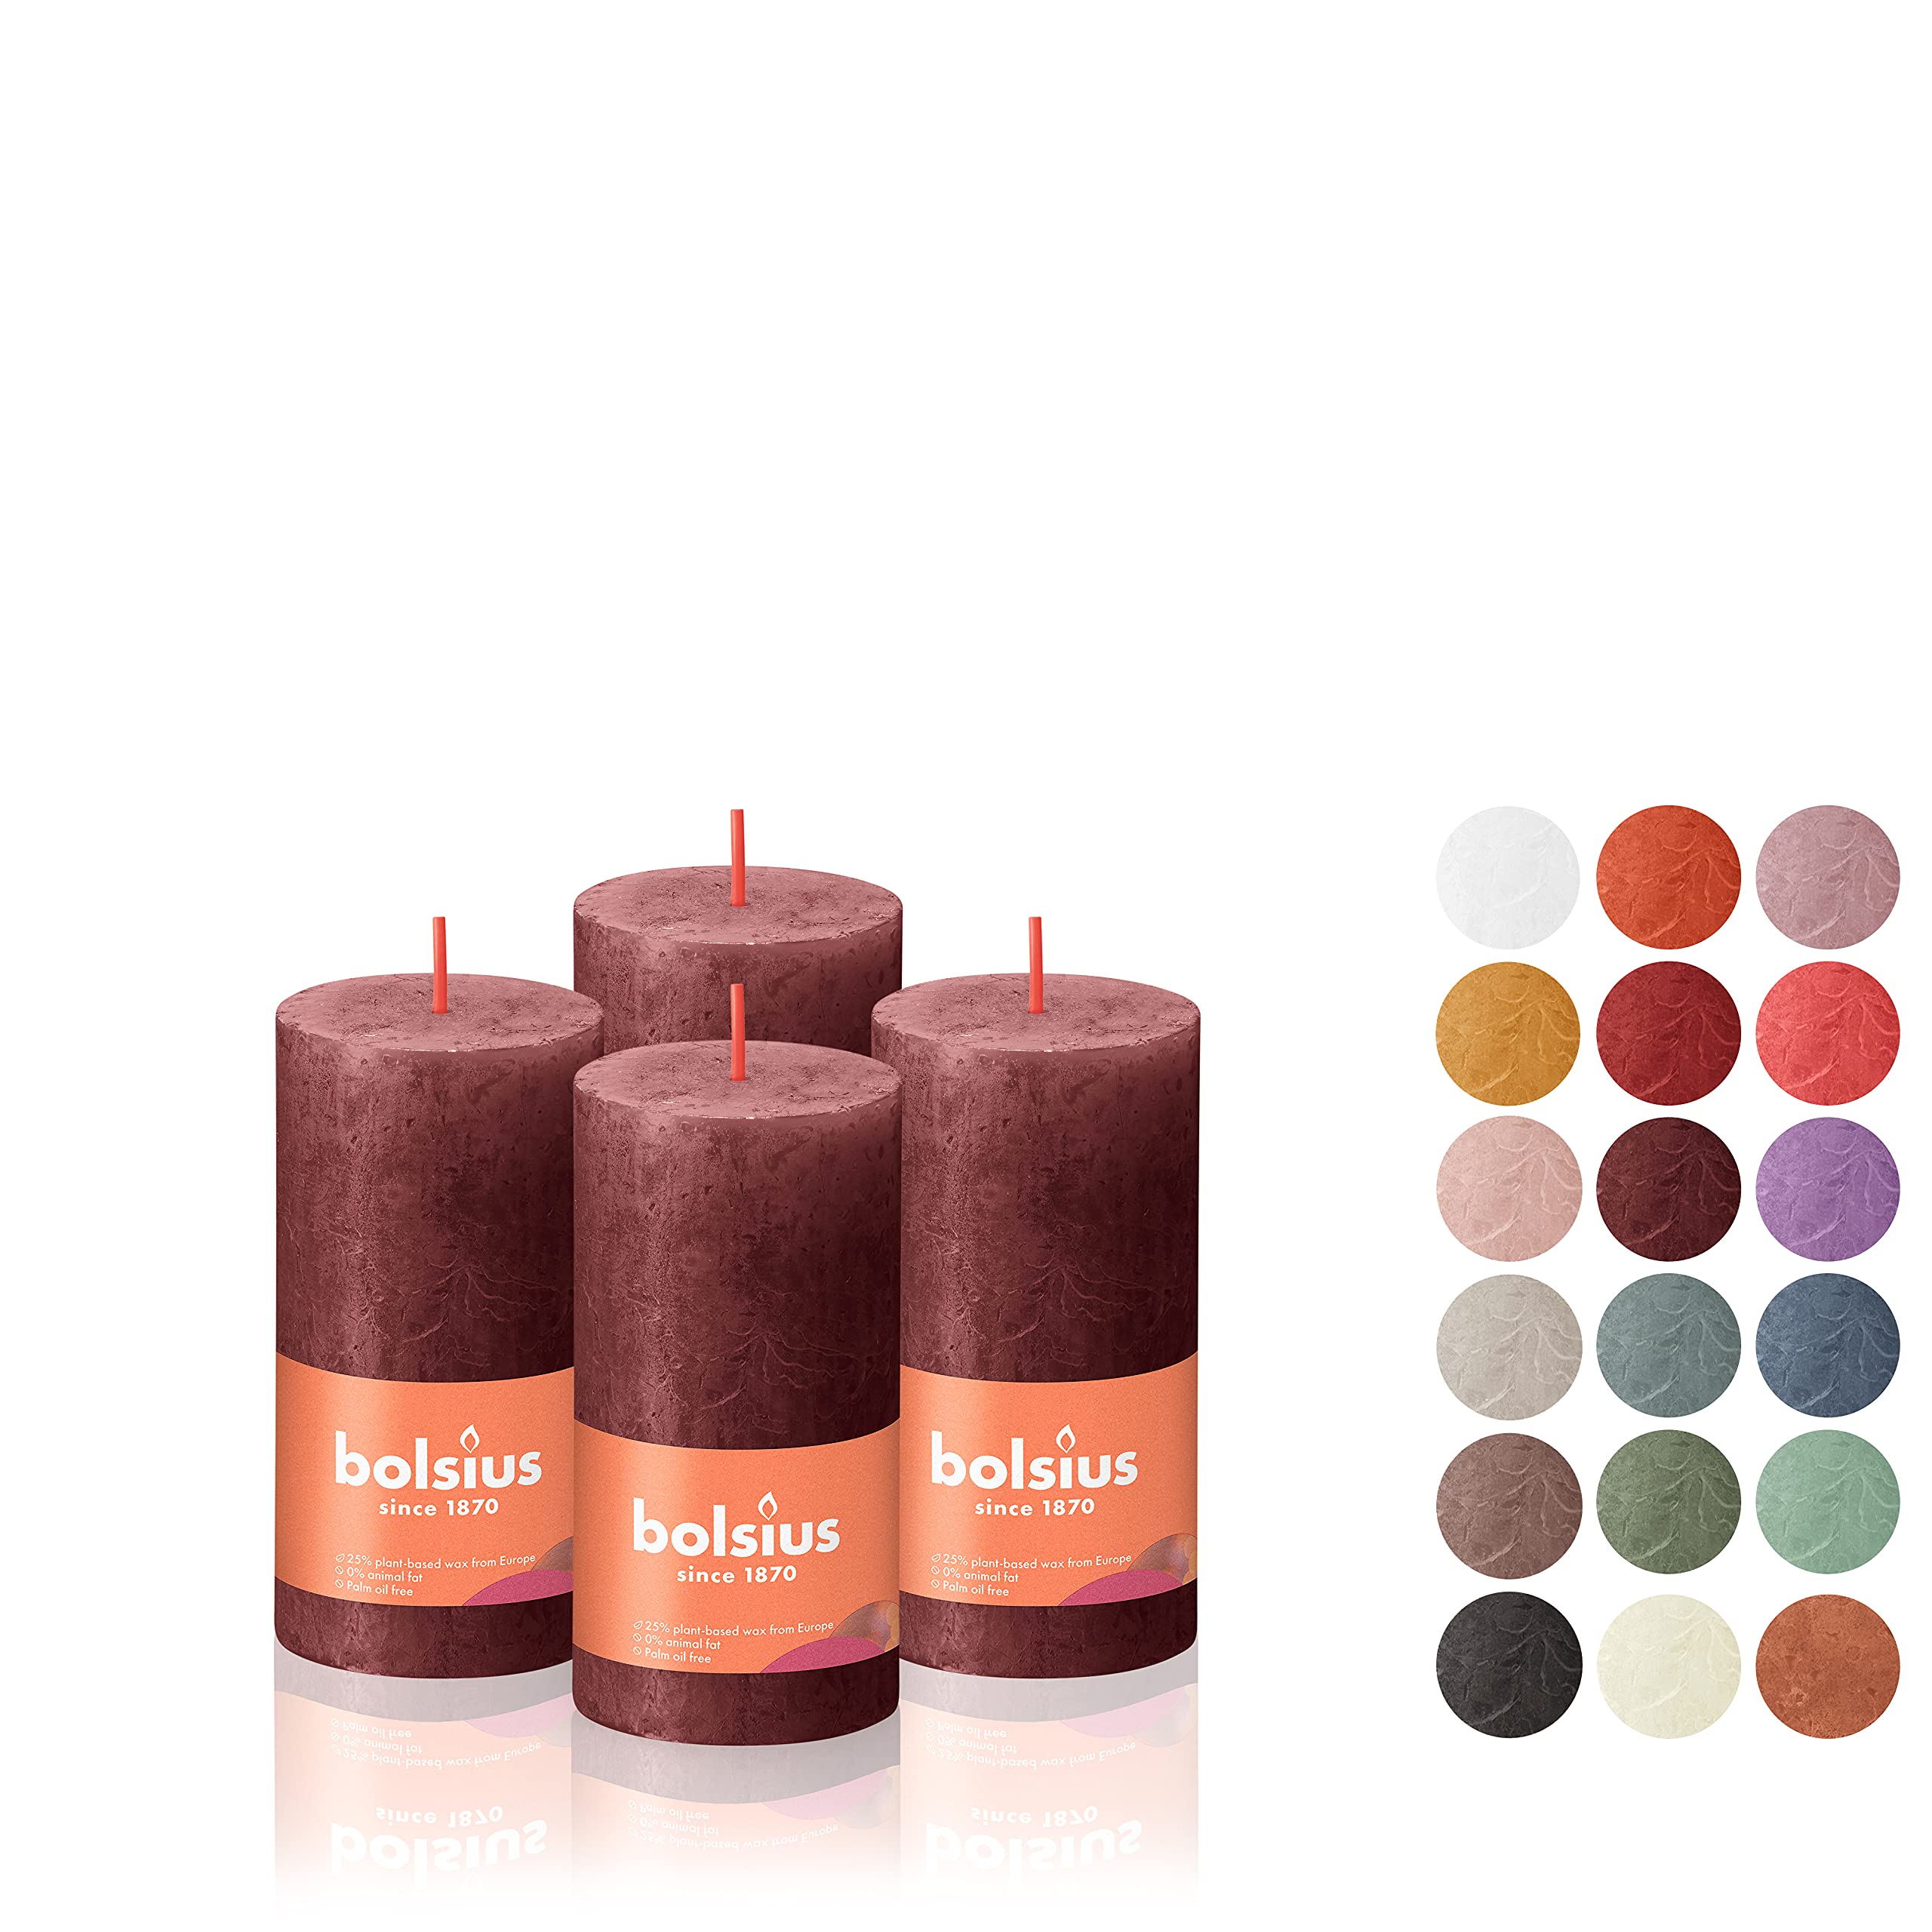 BOLSIUS 4 Pack Velvet Red Rustic Pillar Candles - 2 X 4 Inches - Premium European Quality - Includes Natural Plant-Based Wax - Unscented Dripless Smokeless 30 Hour Party D�cor and Wedding Candles  - Acceptable